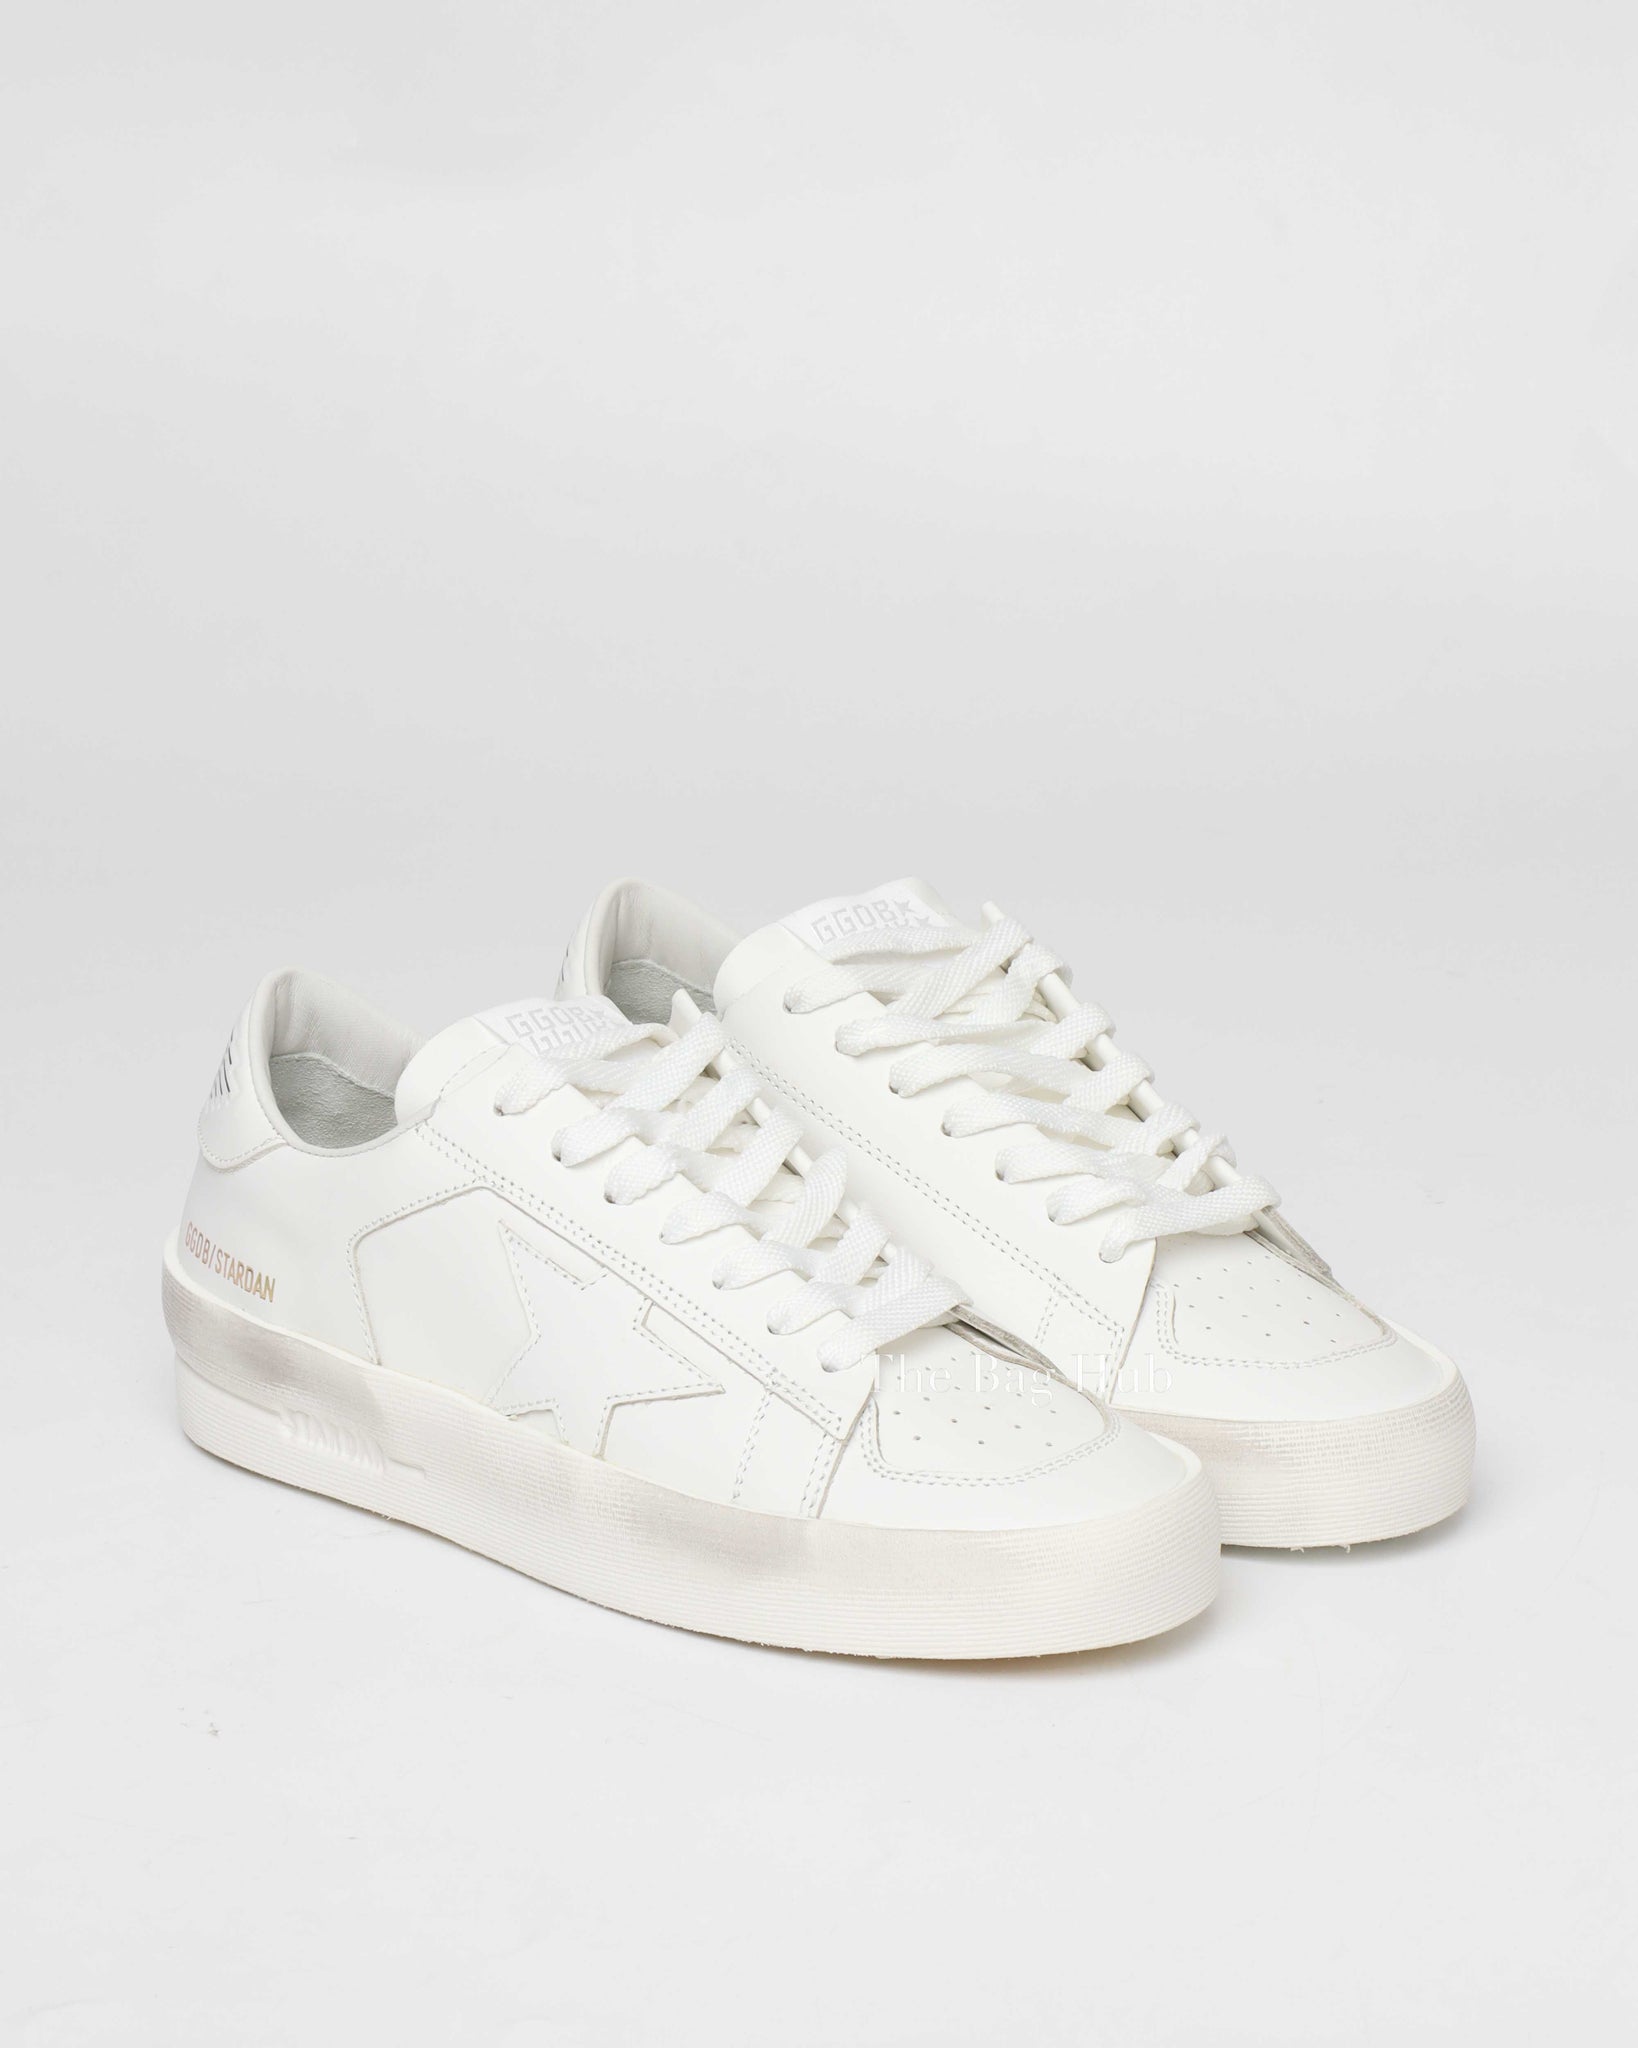 Golden Goose White Leather Stardan Sneakers Size 36-2